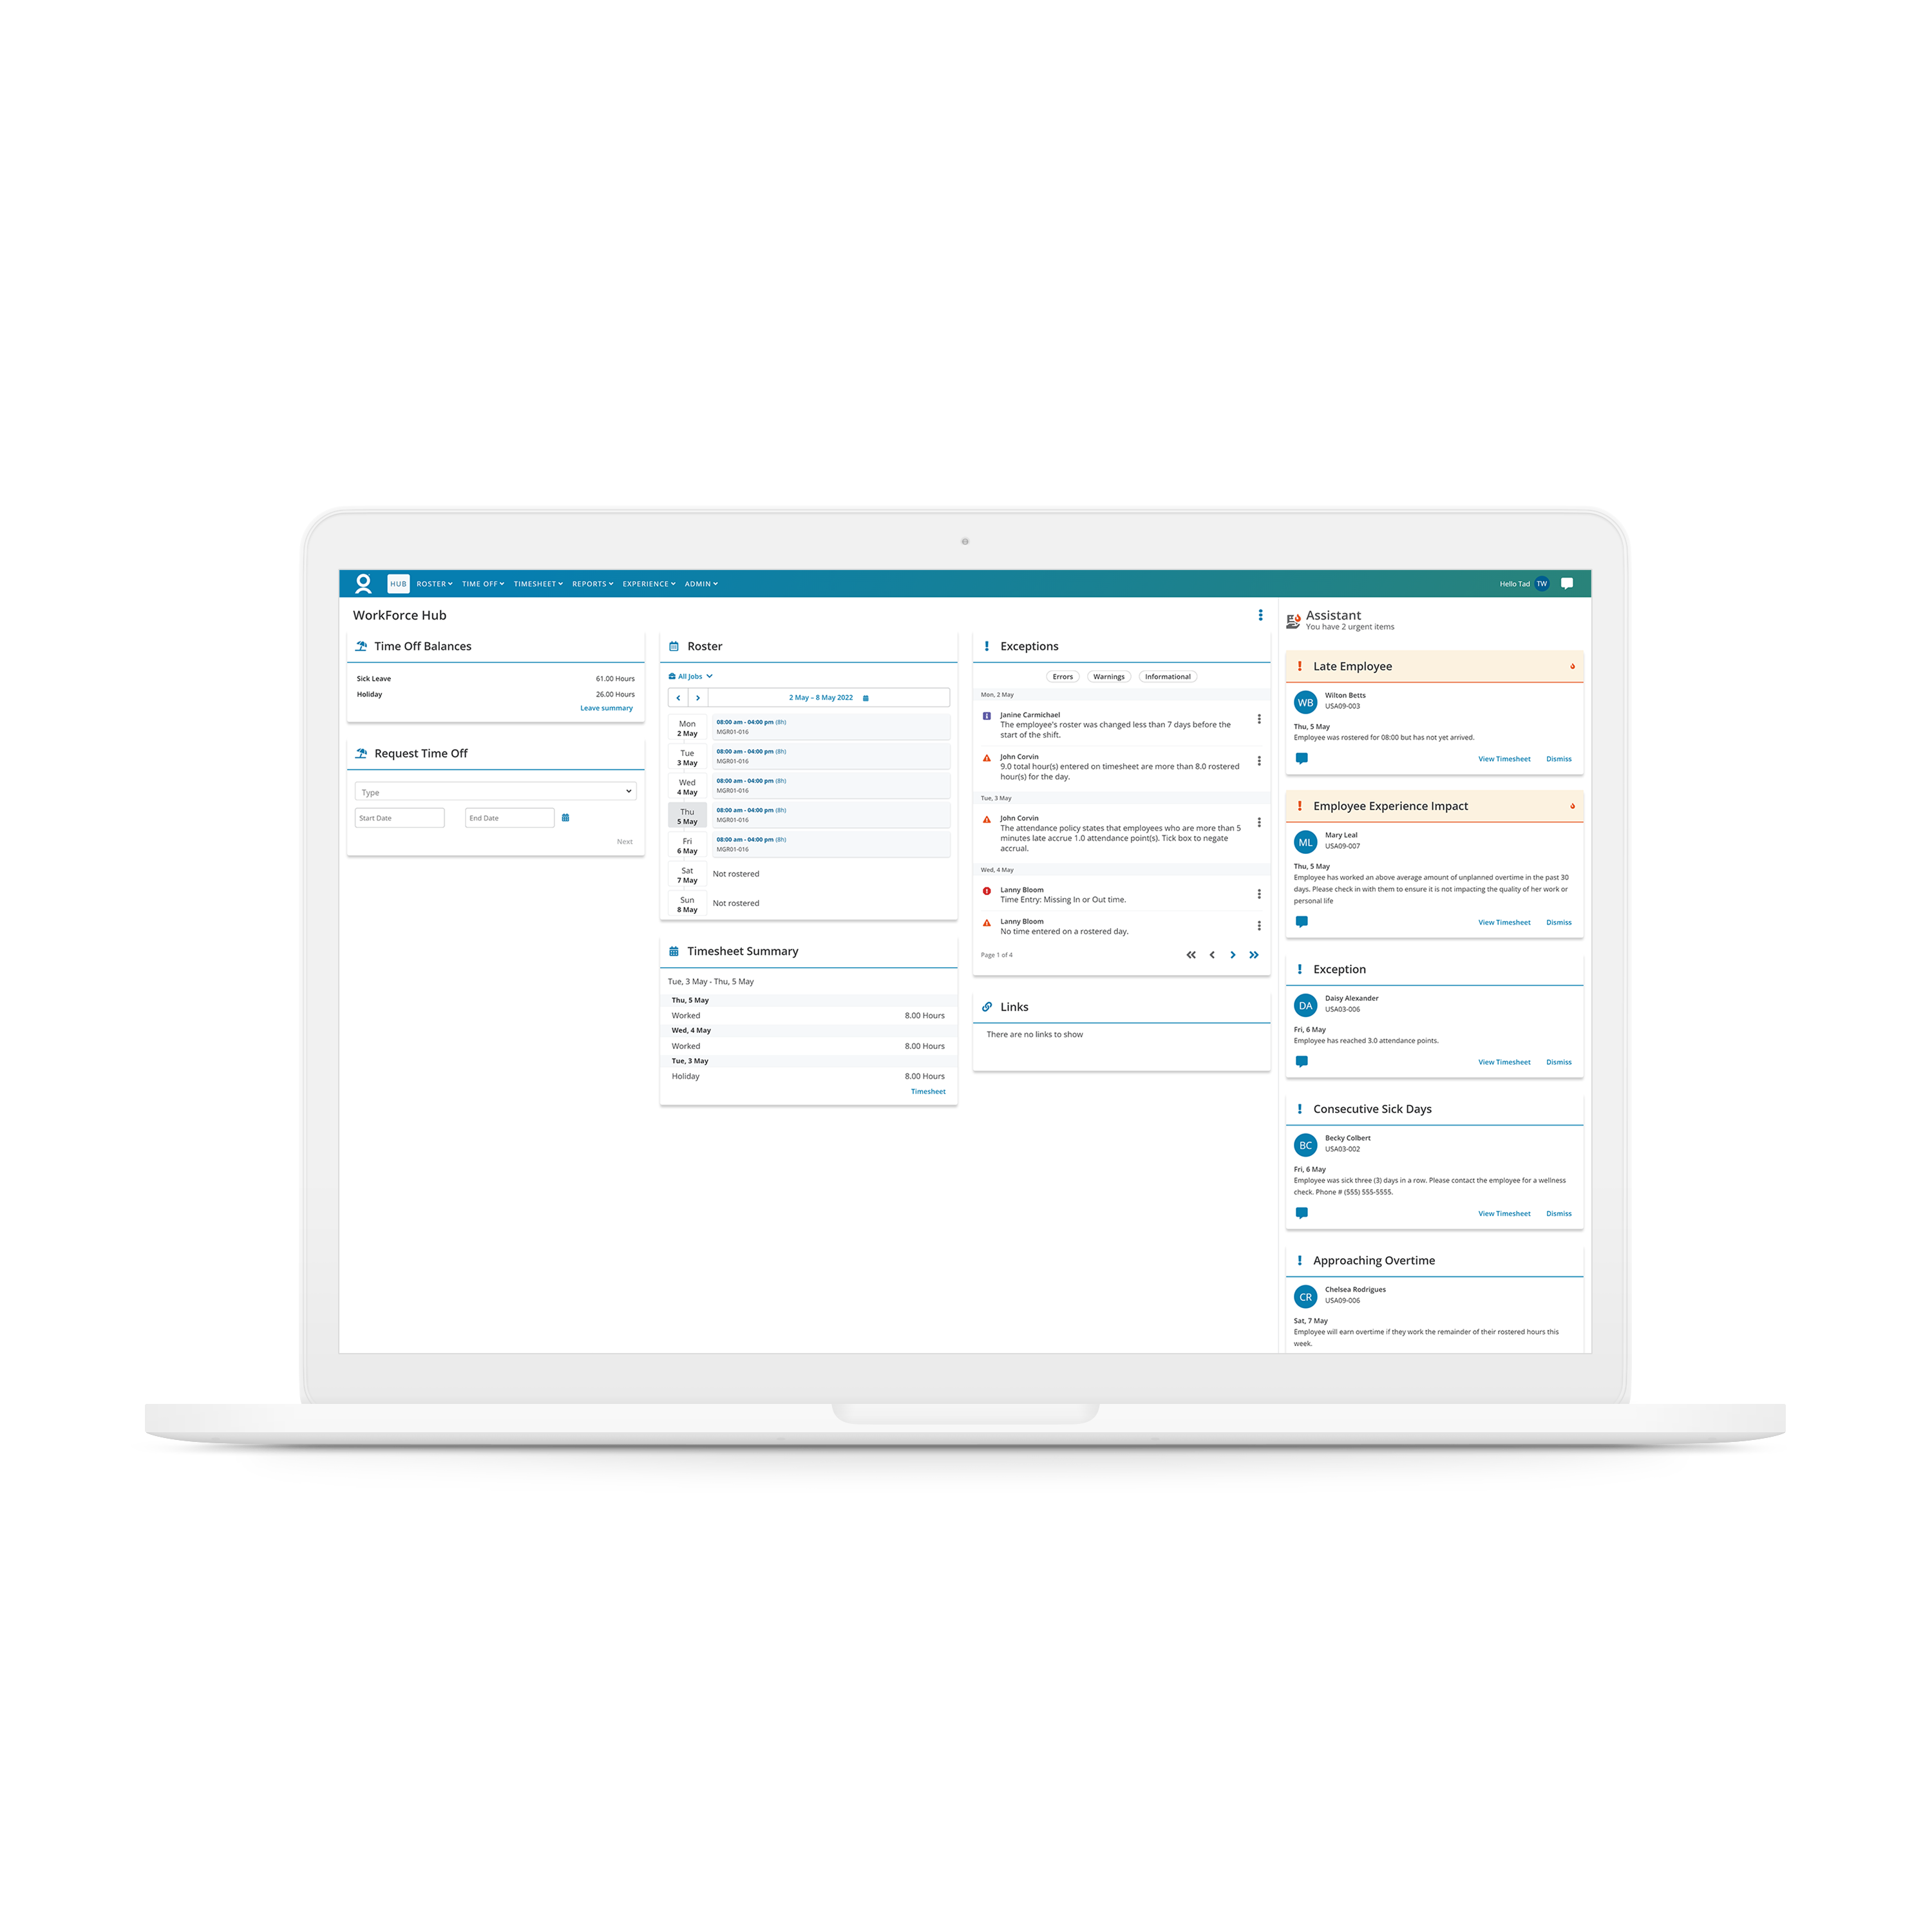 WorkForce HUB: Identifies and prioritizes urgent matters, such as potential compliance risks or labor attendance issues, and triggers predictive and proactive notifications that alert stakeholders when action is required.